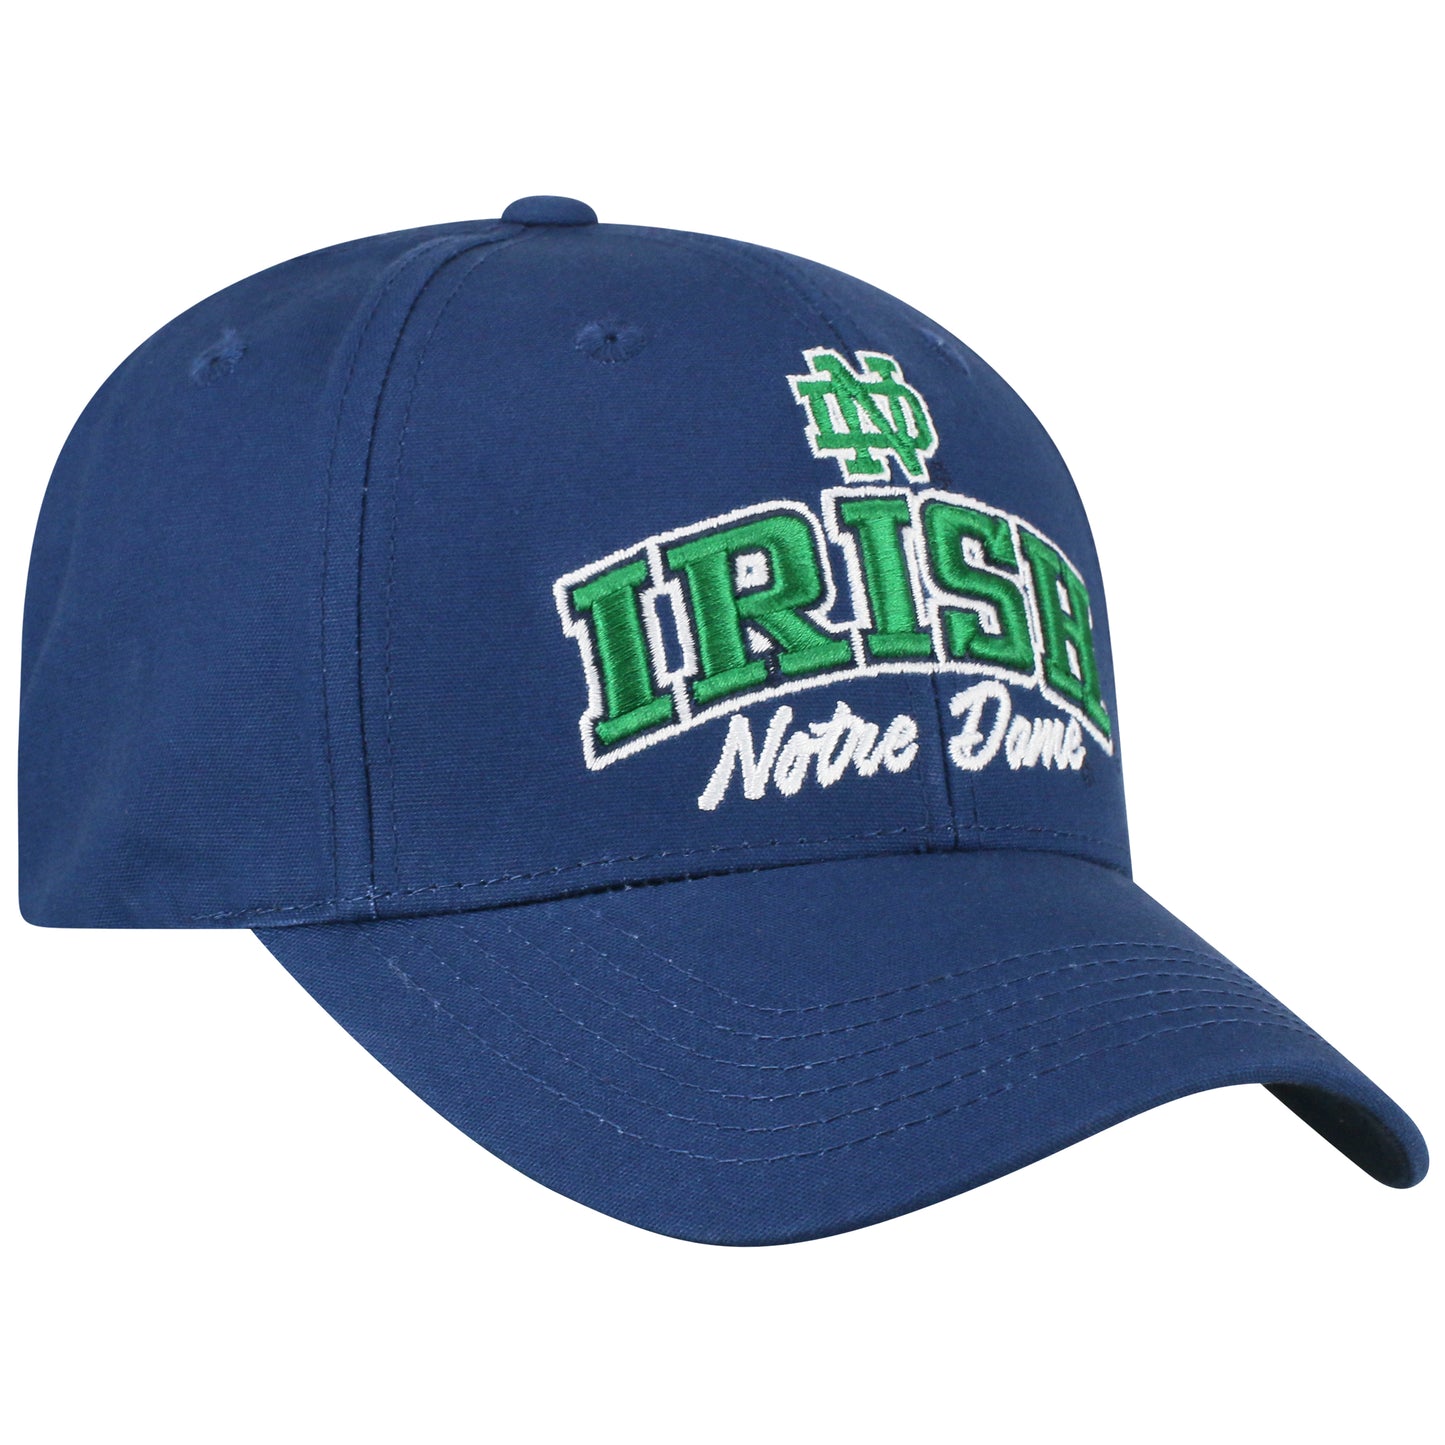 Mens Notre Dame Fighting Irish Advisor Adjustable Hat By Top Of The World